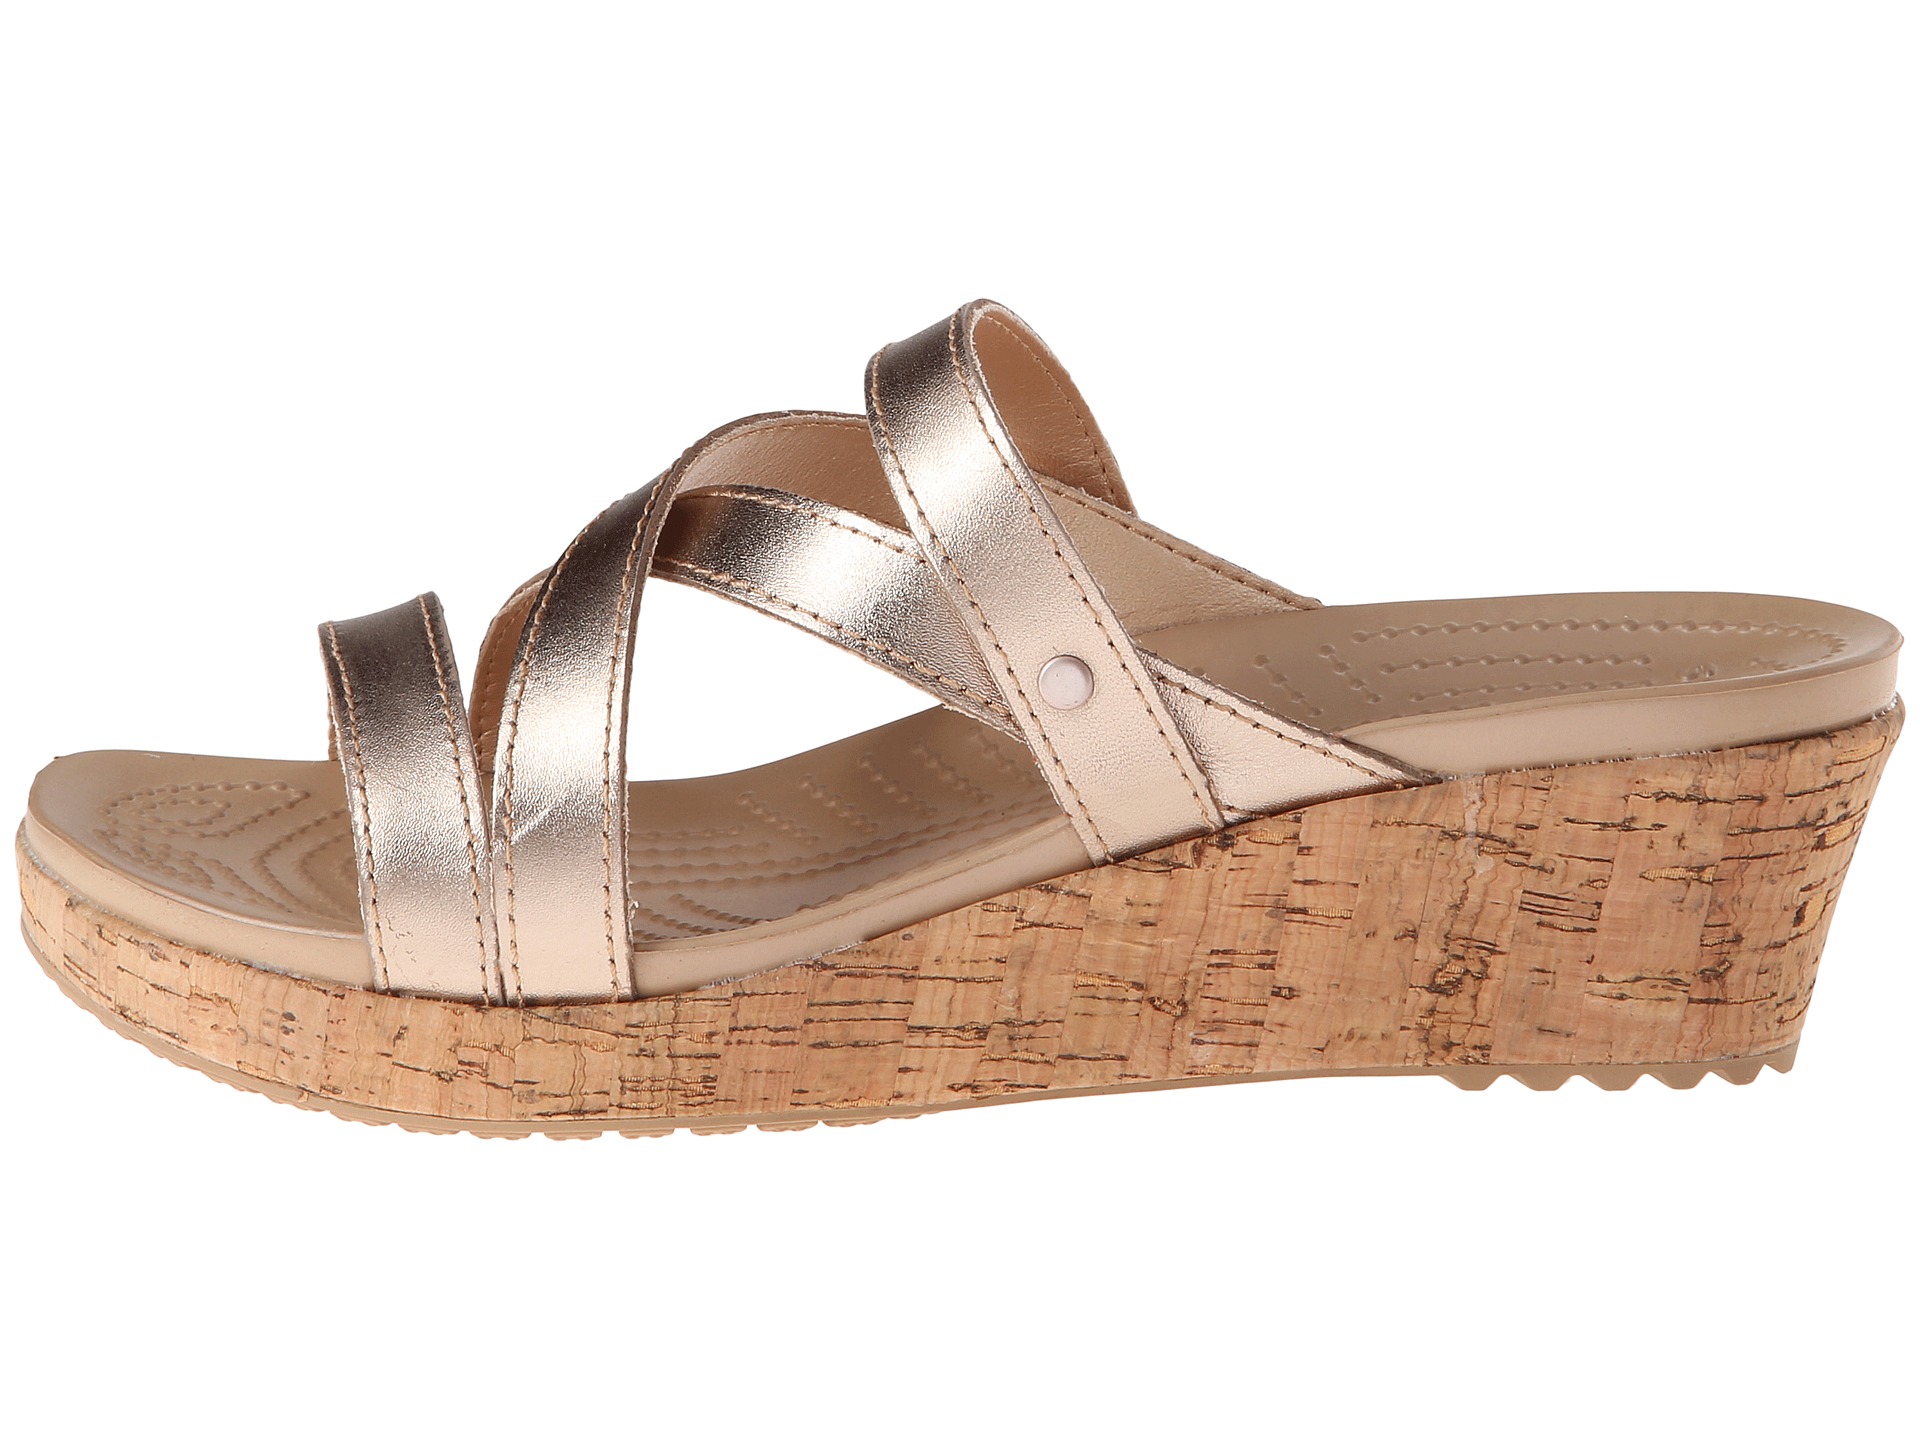 Crocs A Leigh Mini Wedge Metallic Leather | Shipped Free at Zappos